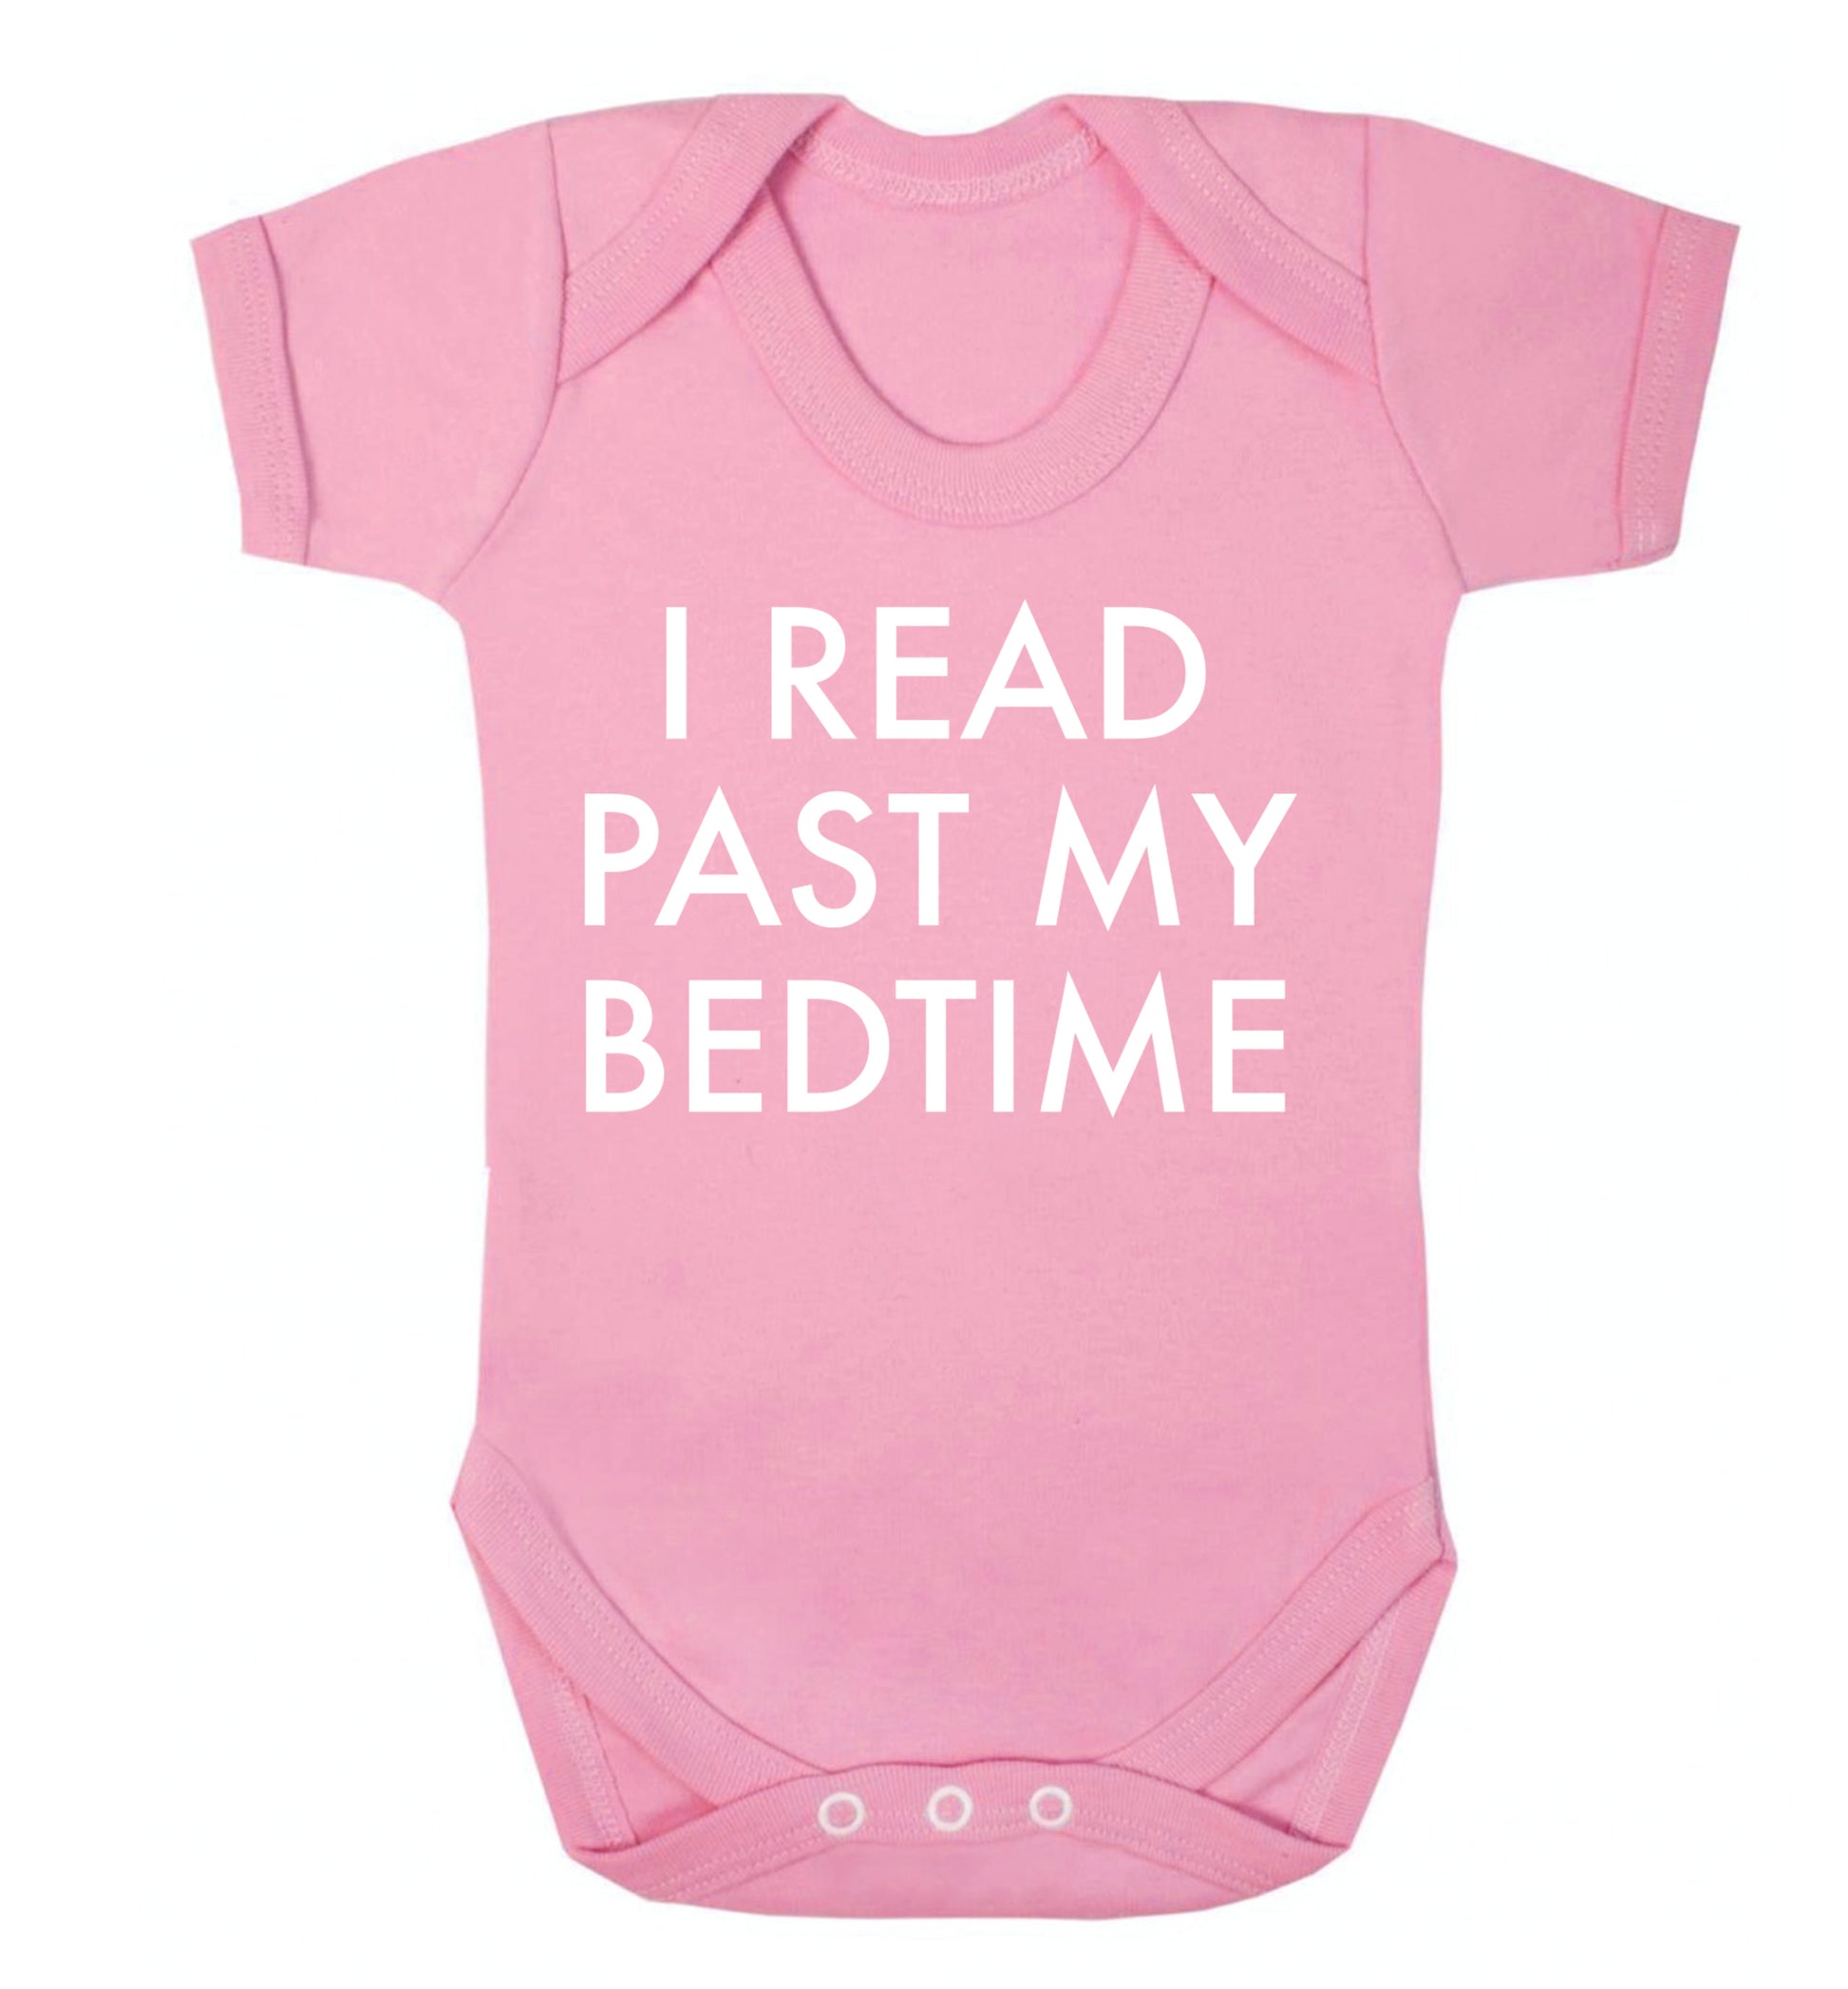 I read past my bedtime Baby Vest pale pink 18-24 months